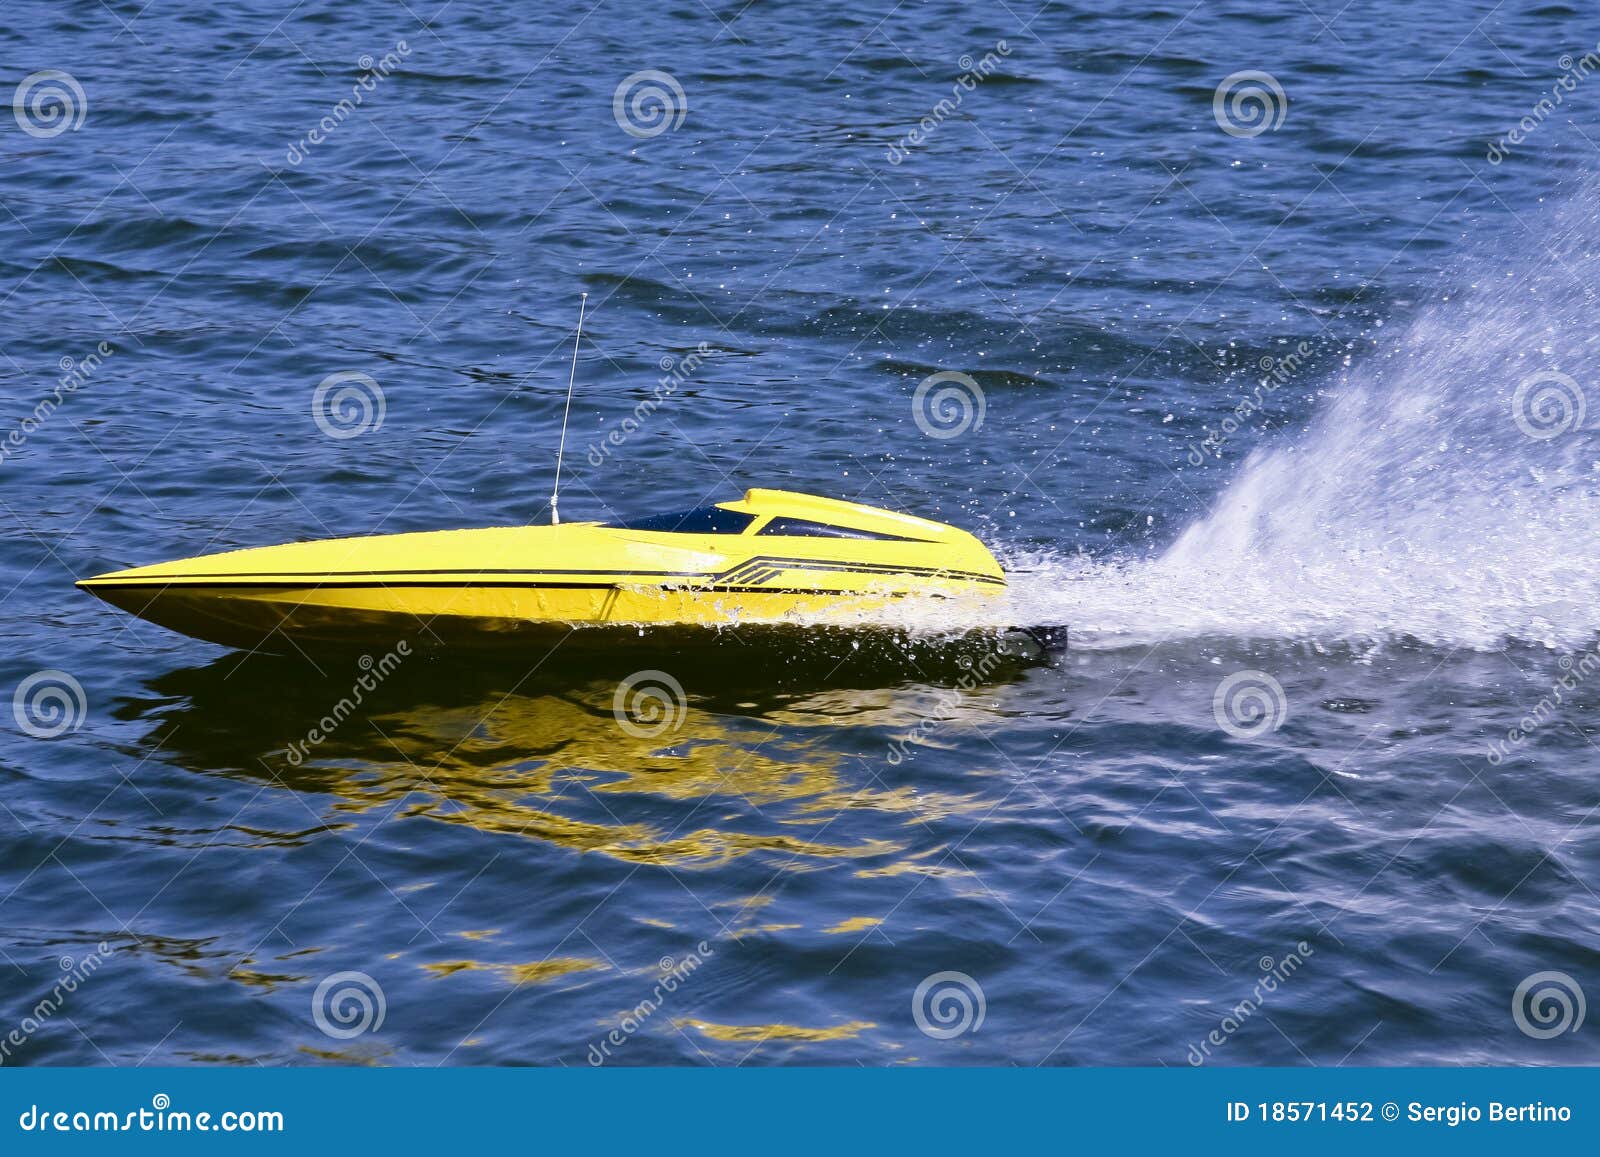 Yellow electric model boat skimming across the water leaving spray in 